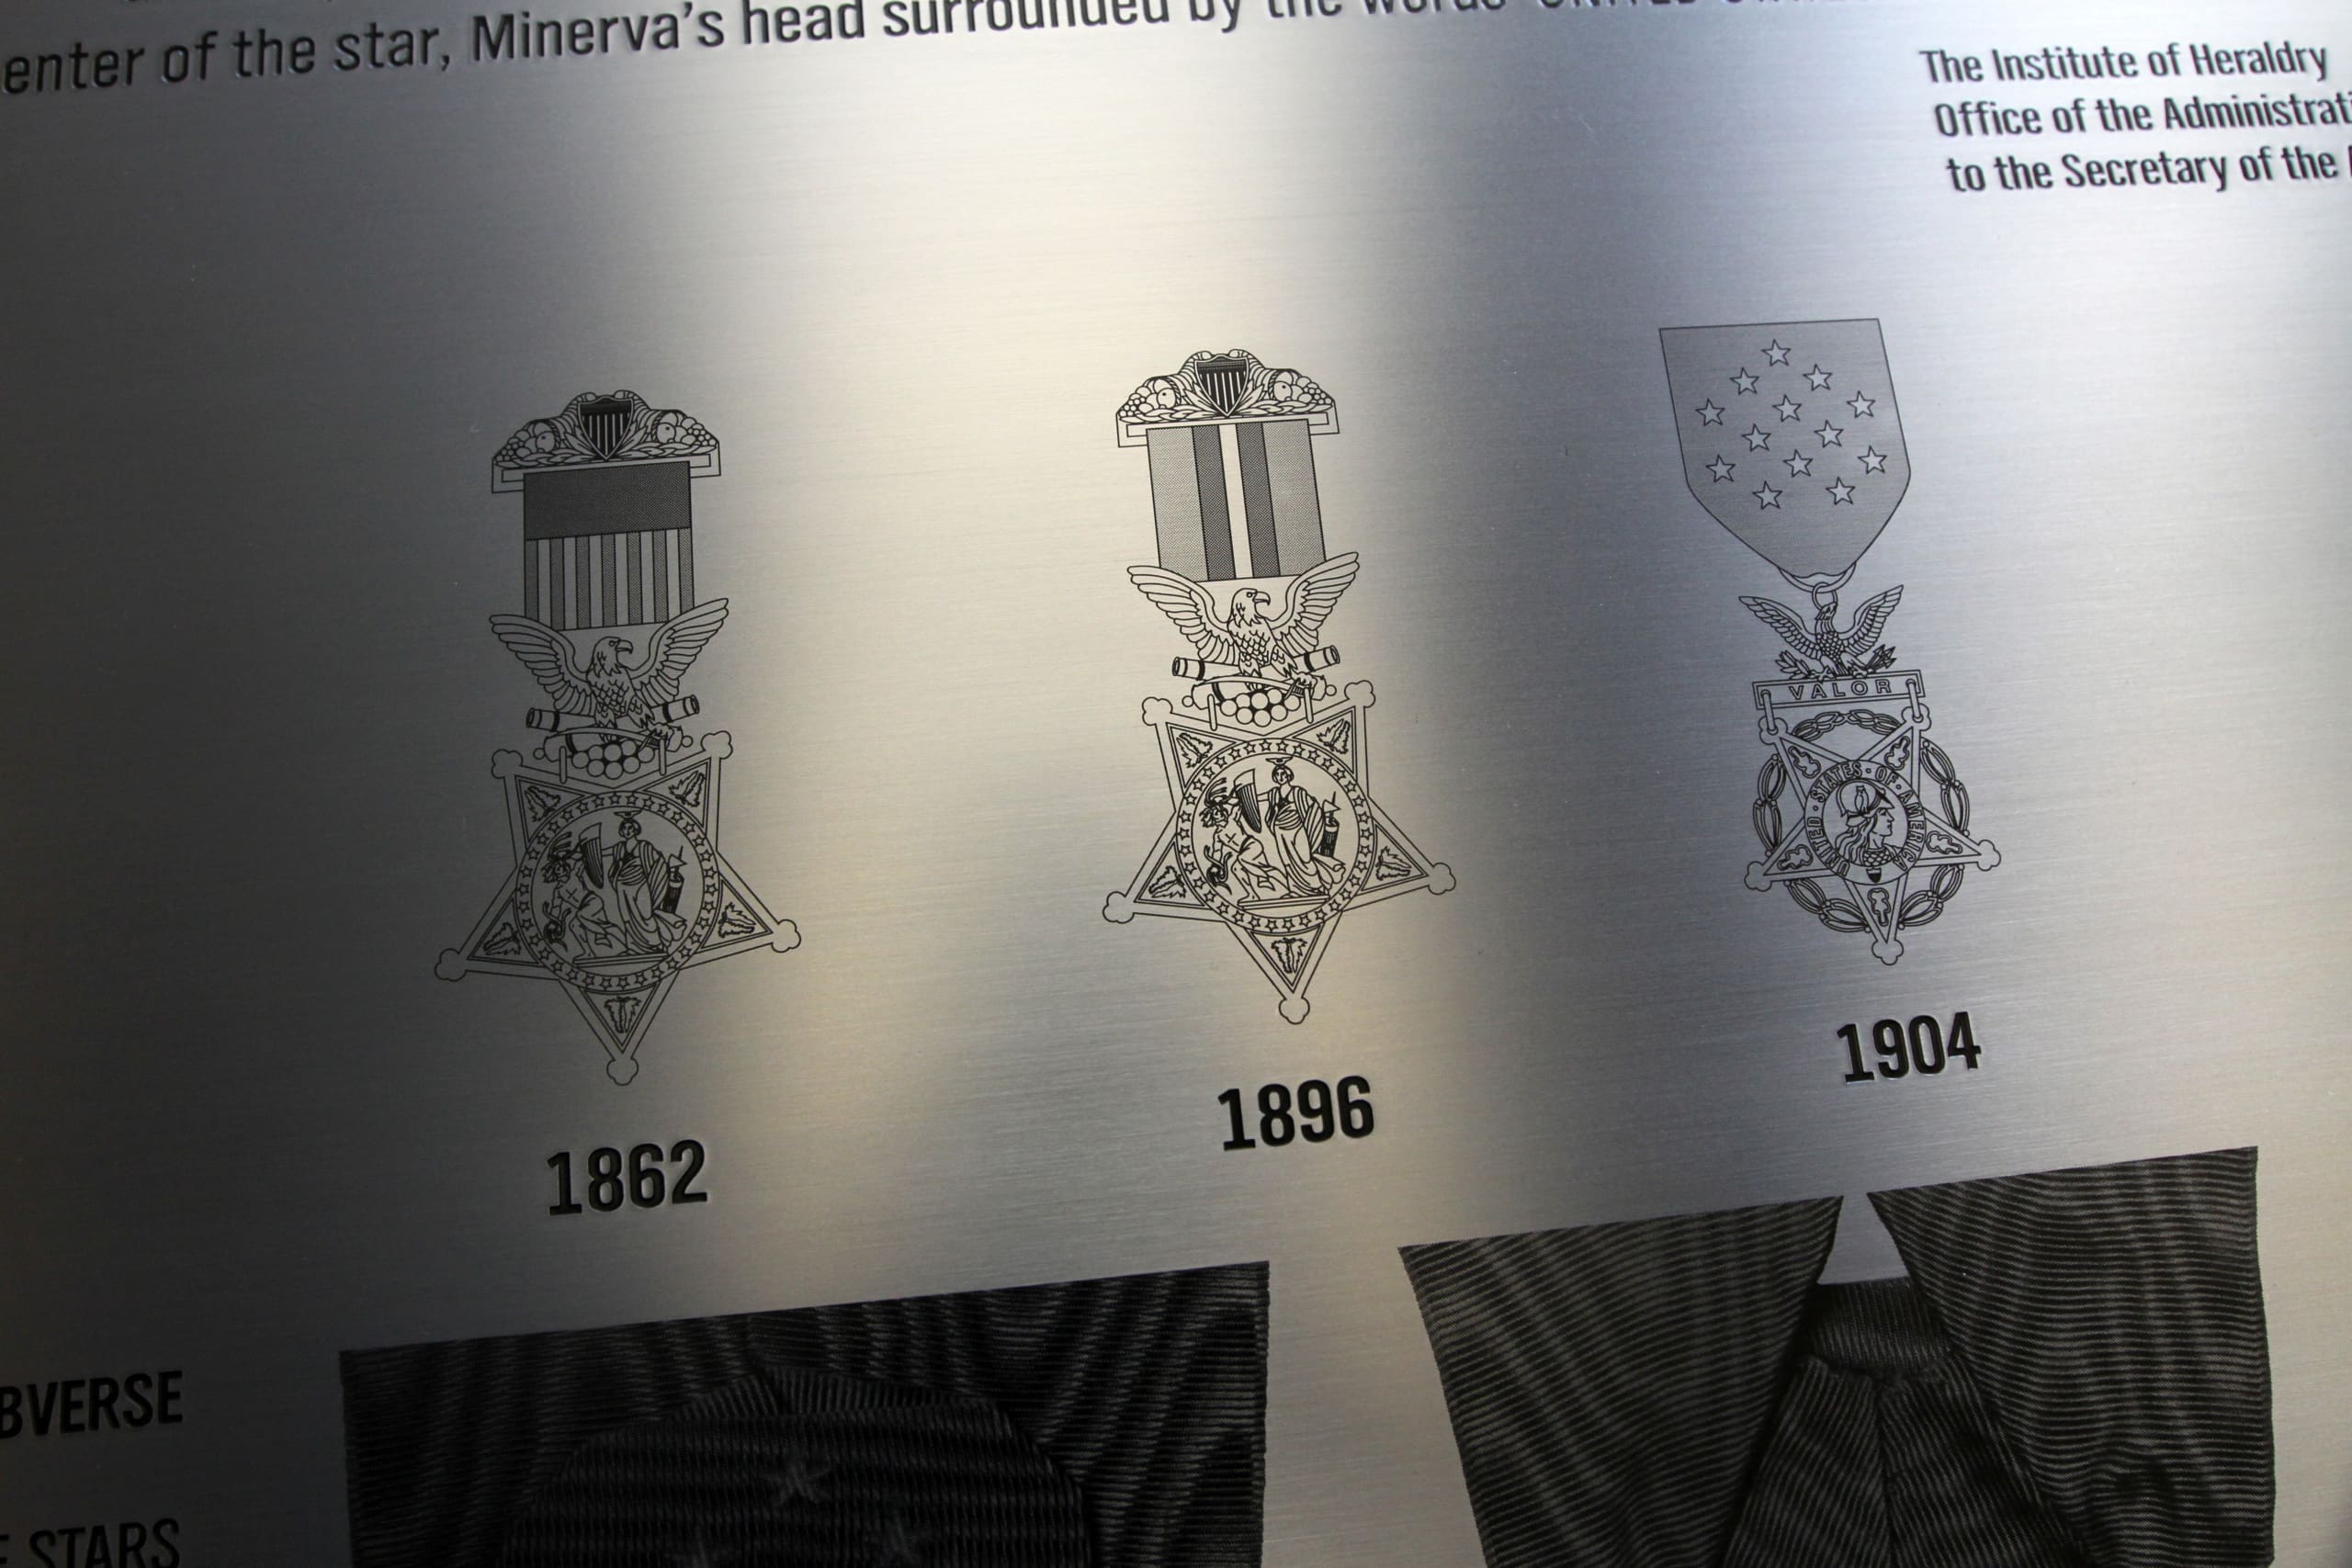 A close-up of another etched stainless steel plaque at the National Museum of the Army. This memorial displays detailed etchings of Army medals from 1862, 1896, and 1904.